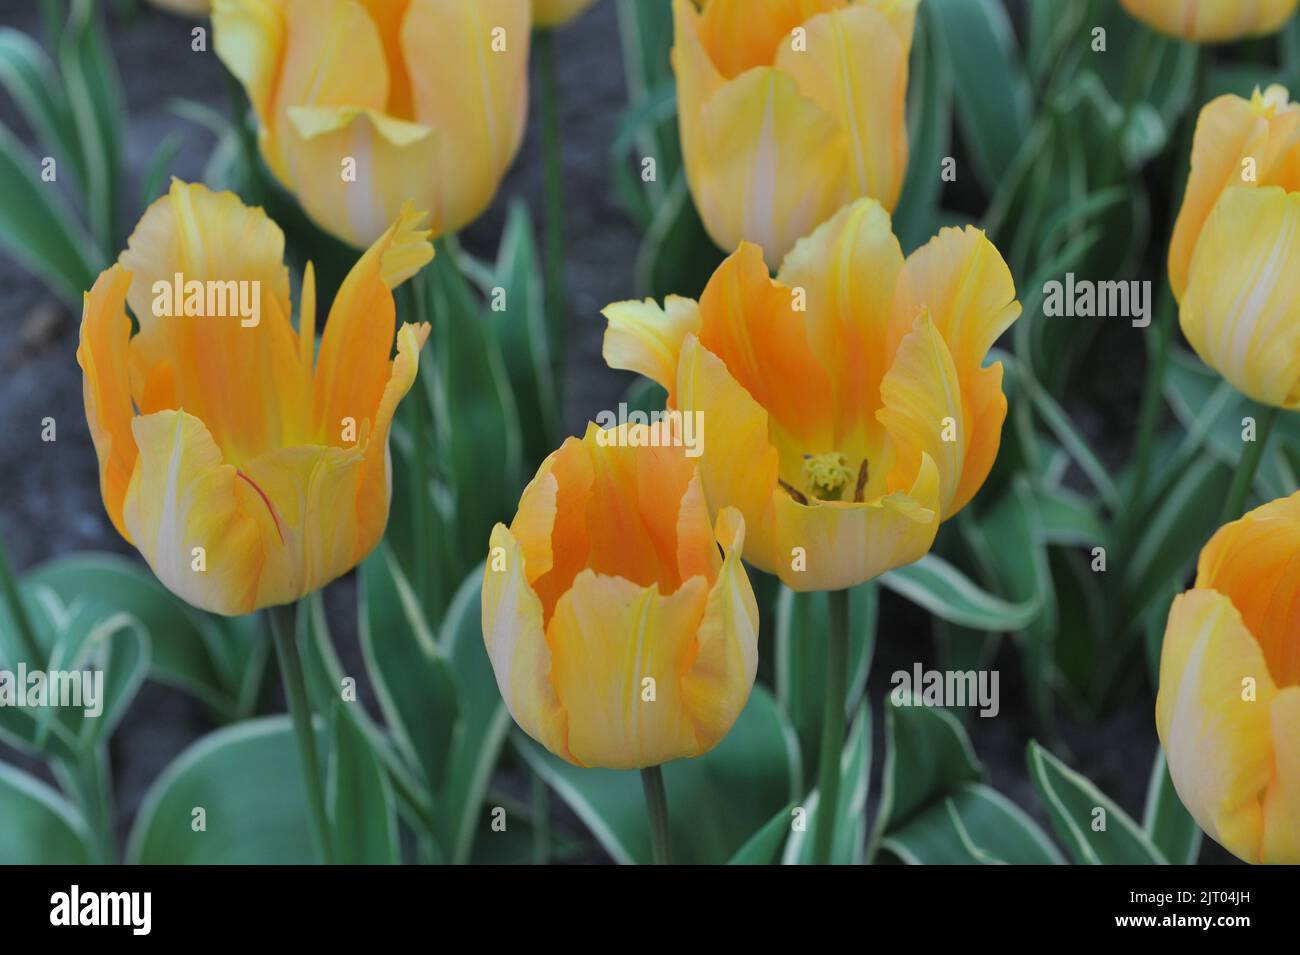 Orange-yellow Single Early tulips (Tulipa) Queen of Bestseller with variegated leaves bloom in a garden in March Stock Photo